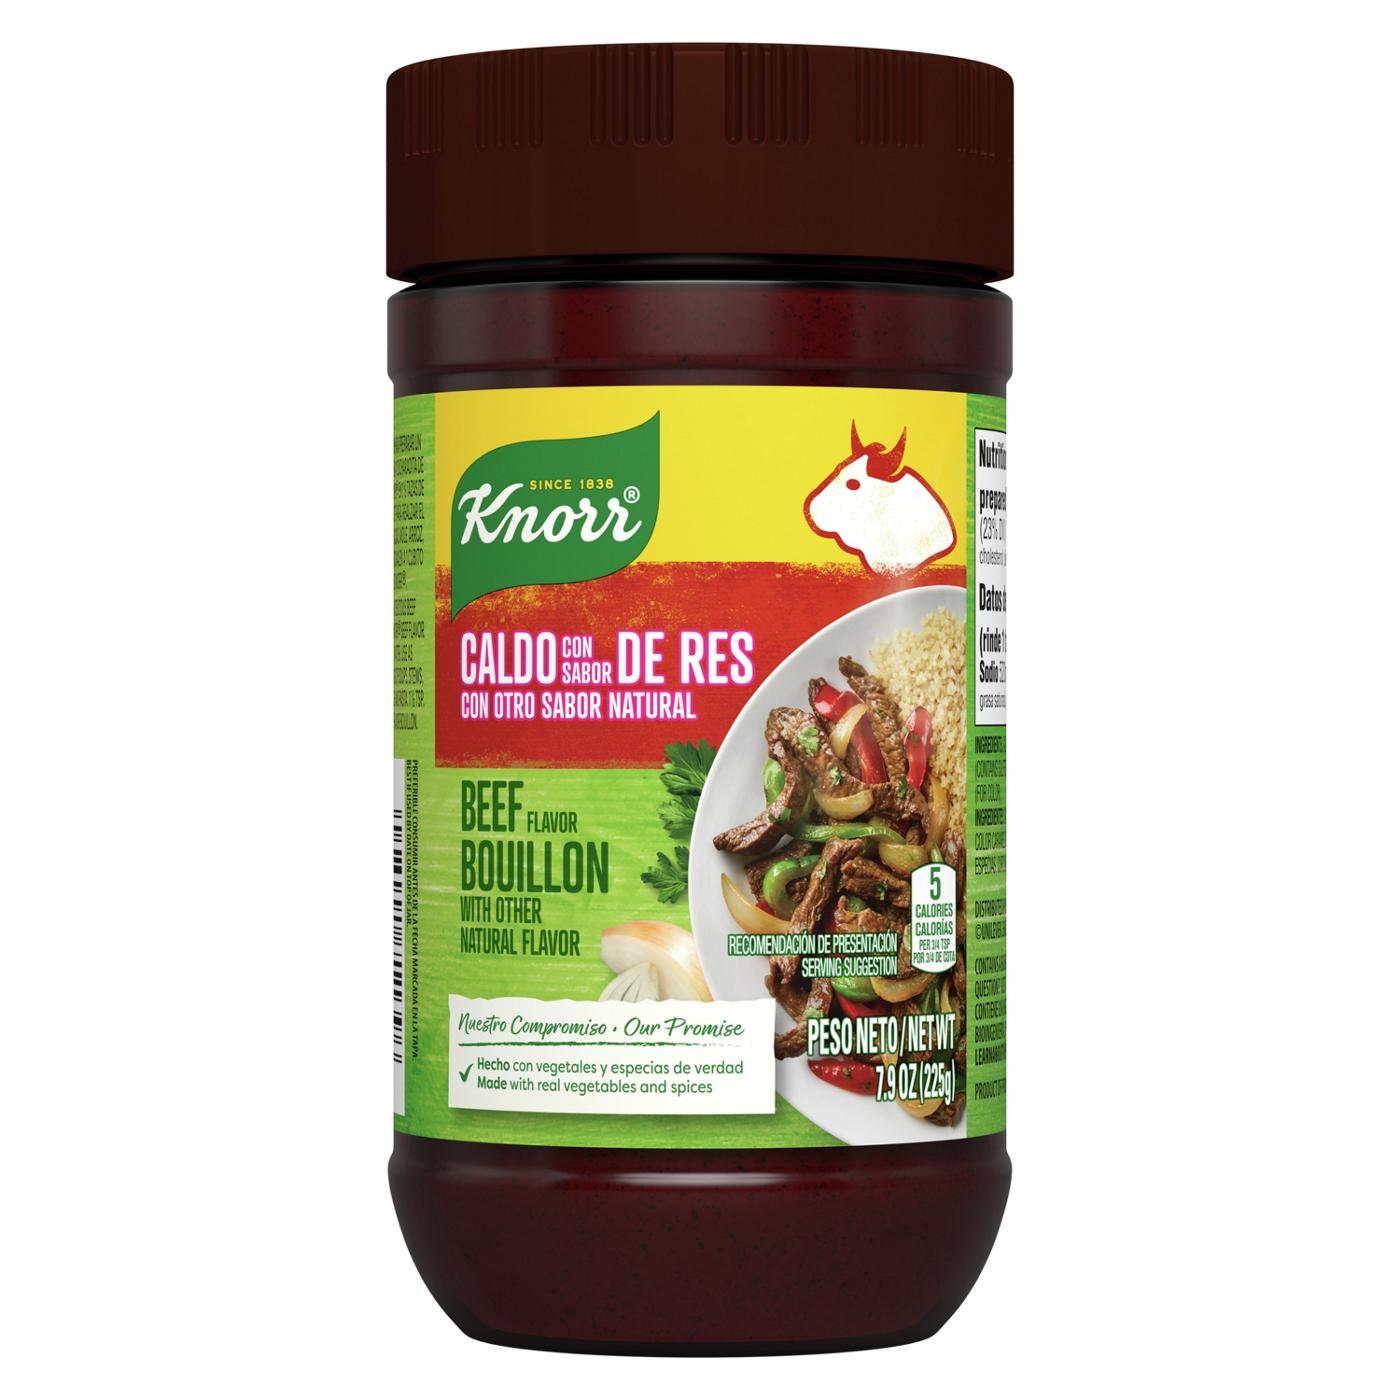 Knorr Beef Flavor Bouillon Granulated; image 1 of 9